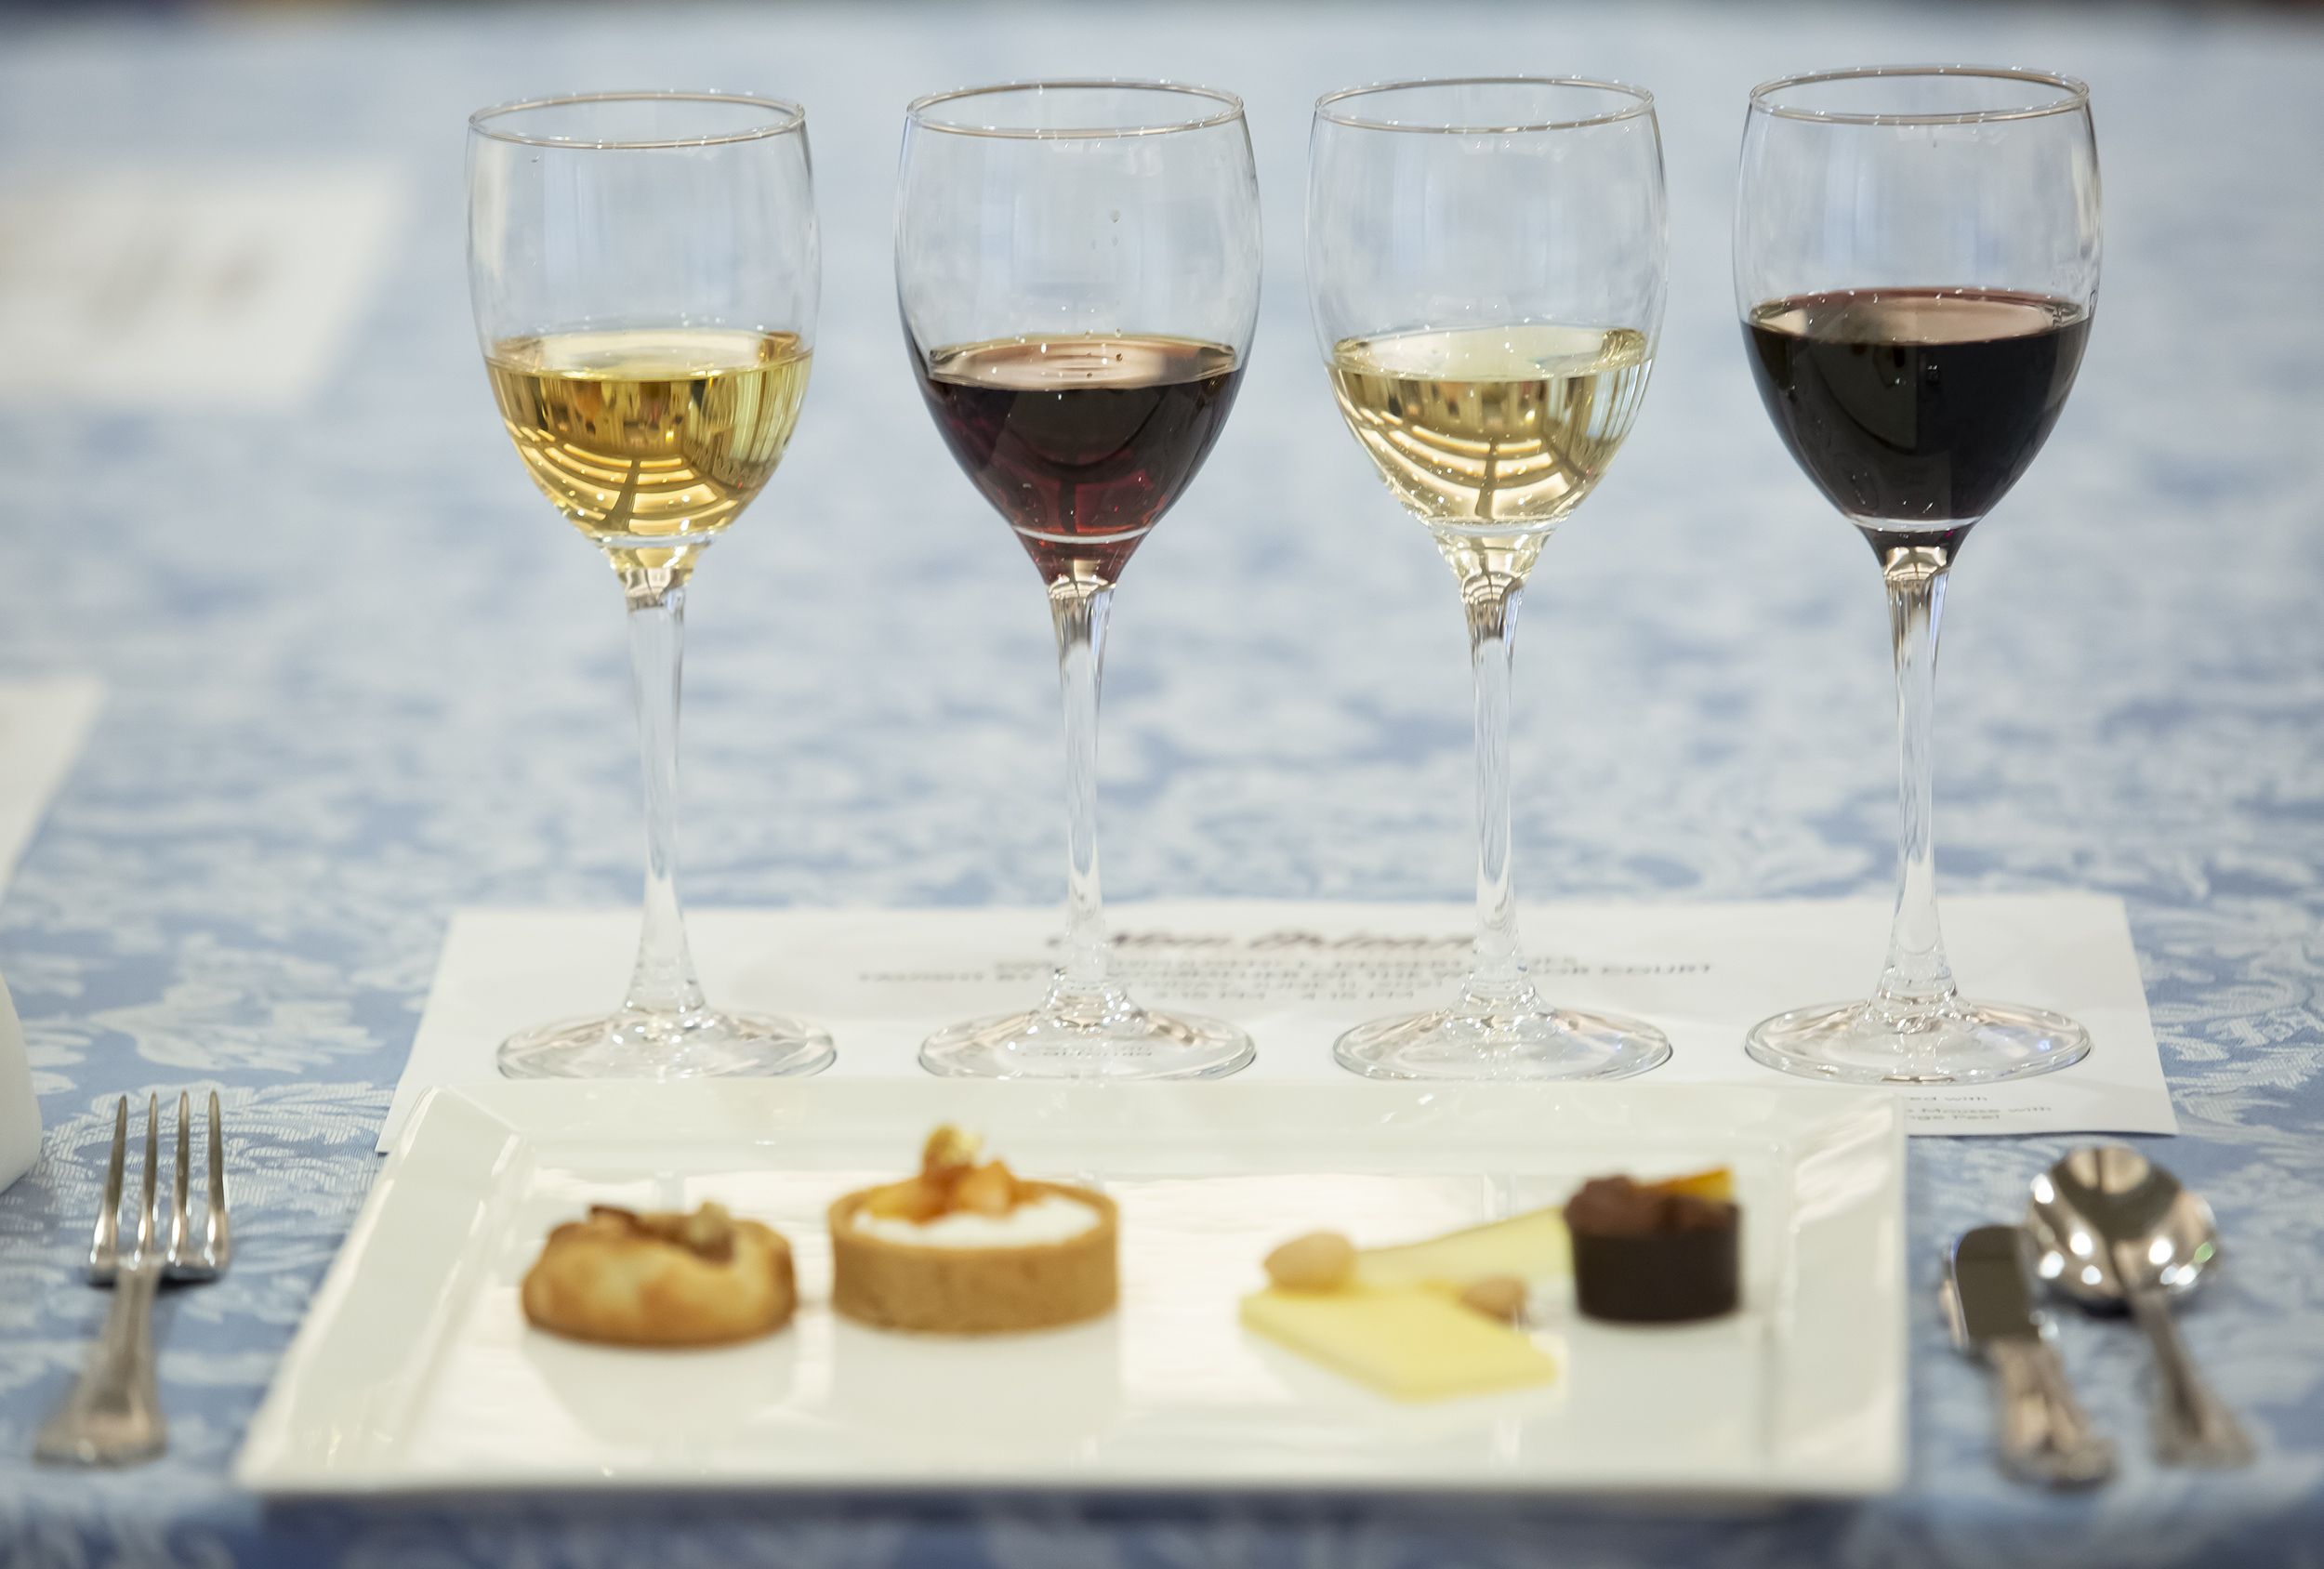 Photo shows wine glasses lined up and filled with different colored wines. A plate of small bites is on the table in front of the wines.